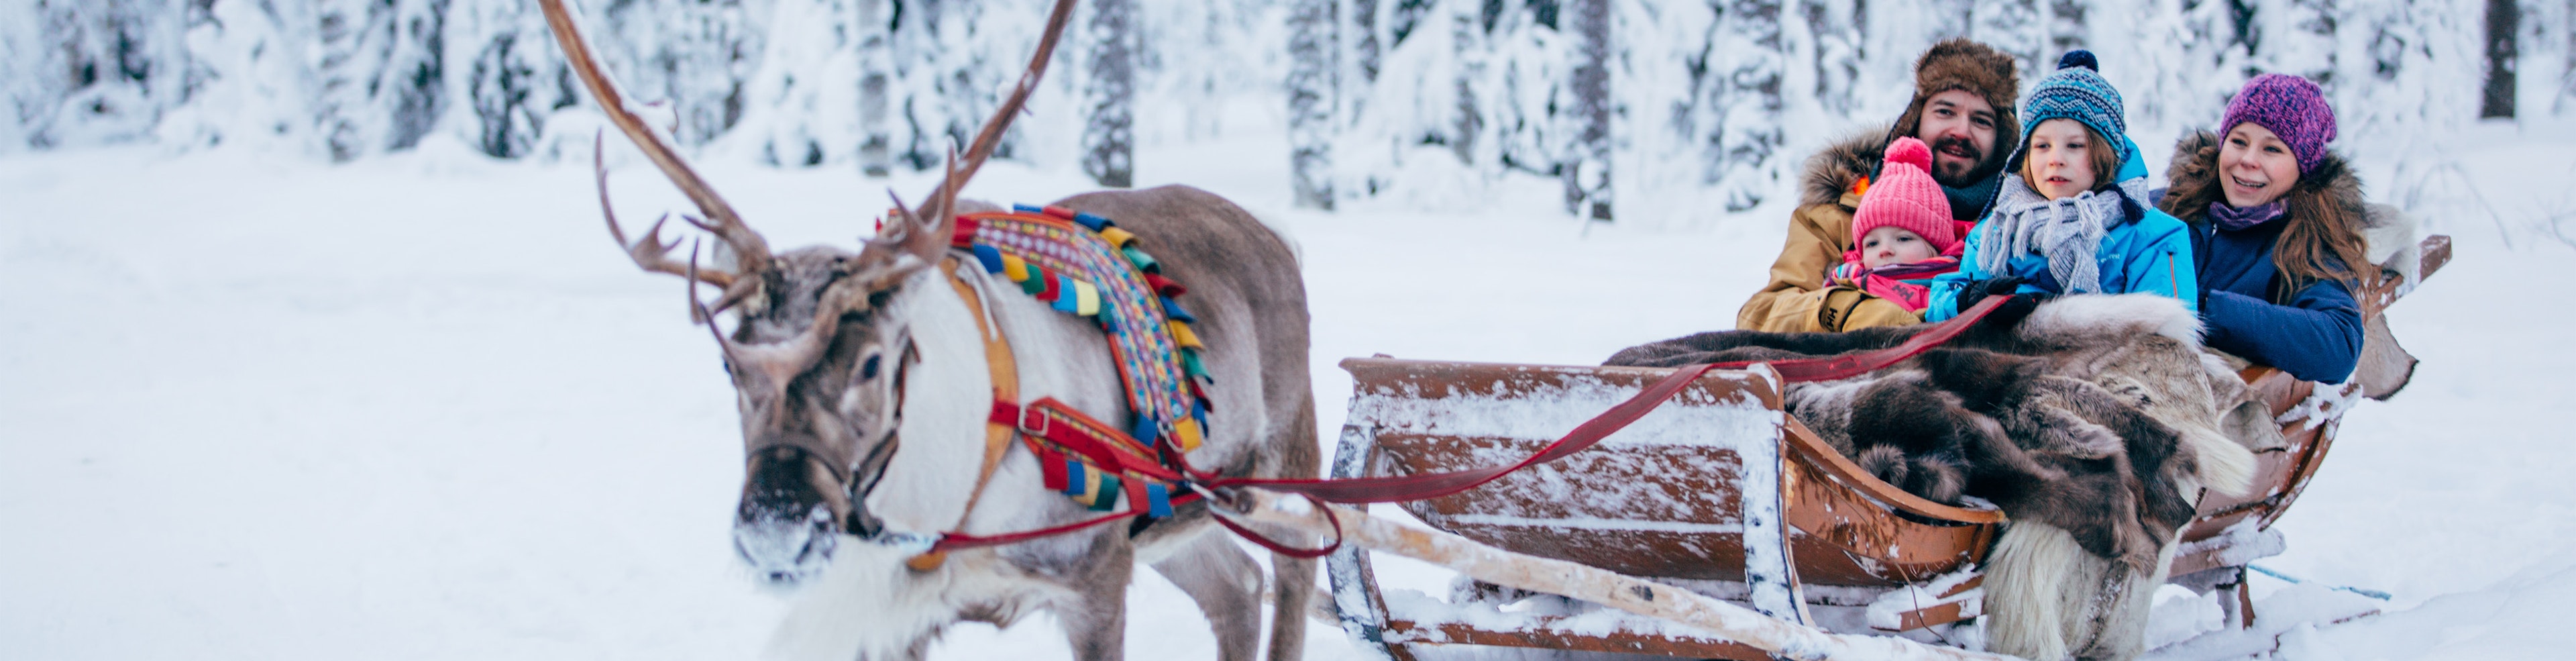 A family on a sled in a snowy landscape in Rovaniemi in Finland being pulled by an adorable reindeer.